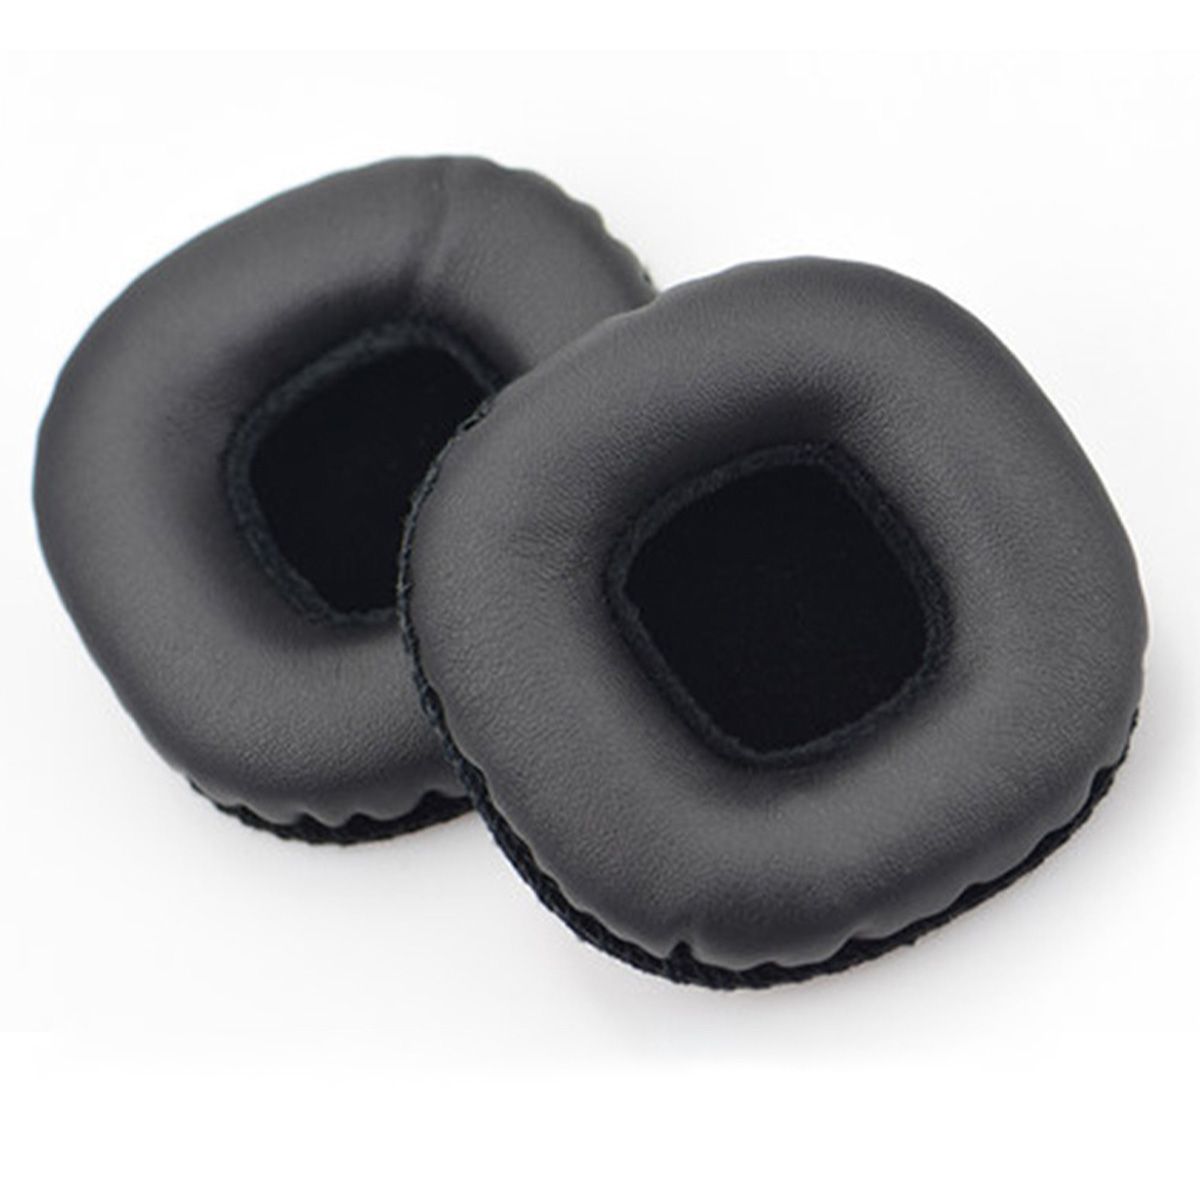 2Pcs-Replacement-Earpads-Earphone-Cushion-Cover-for-MID-ANC-Headphone-1573376